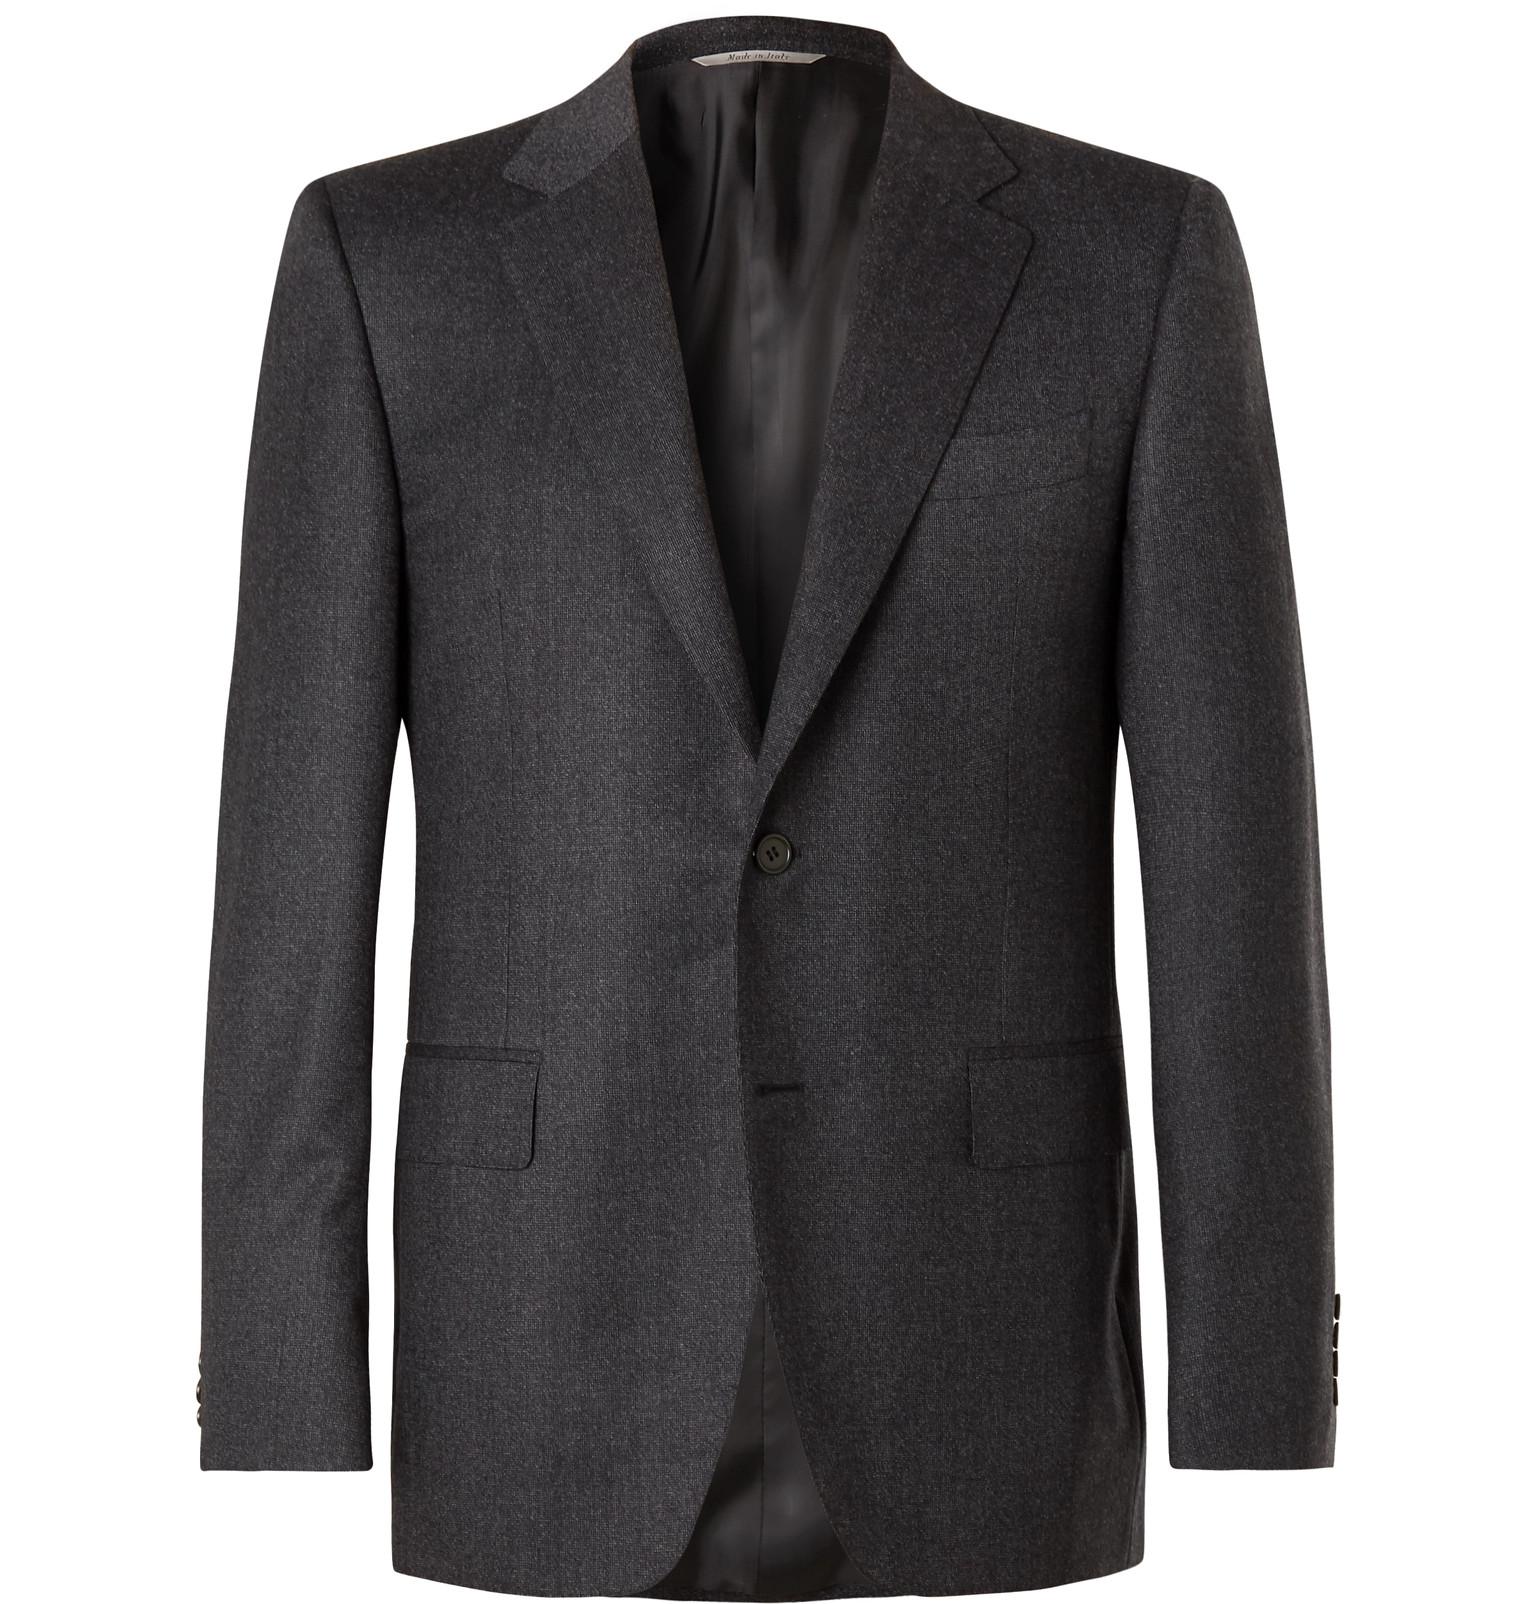 Canali Charcoal Super 120s Virgin Wool Suit Jacket in Gray for Men - Lyst